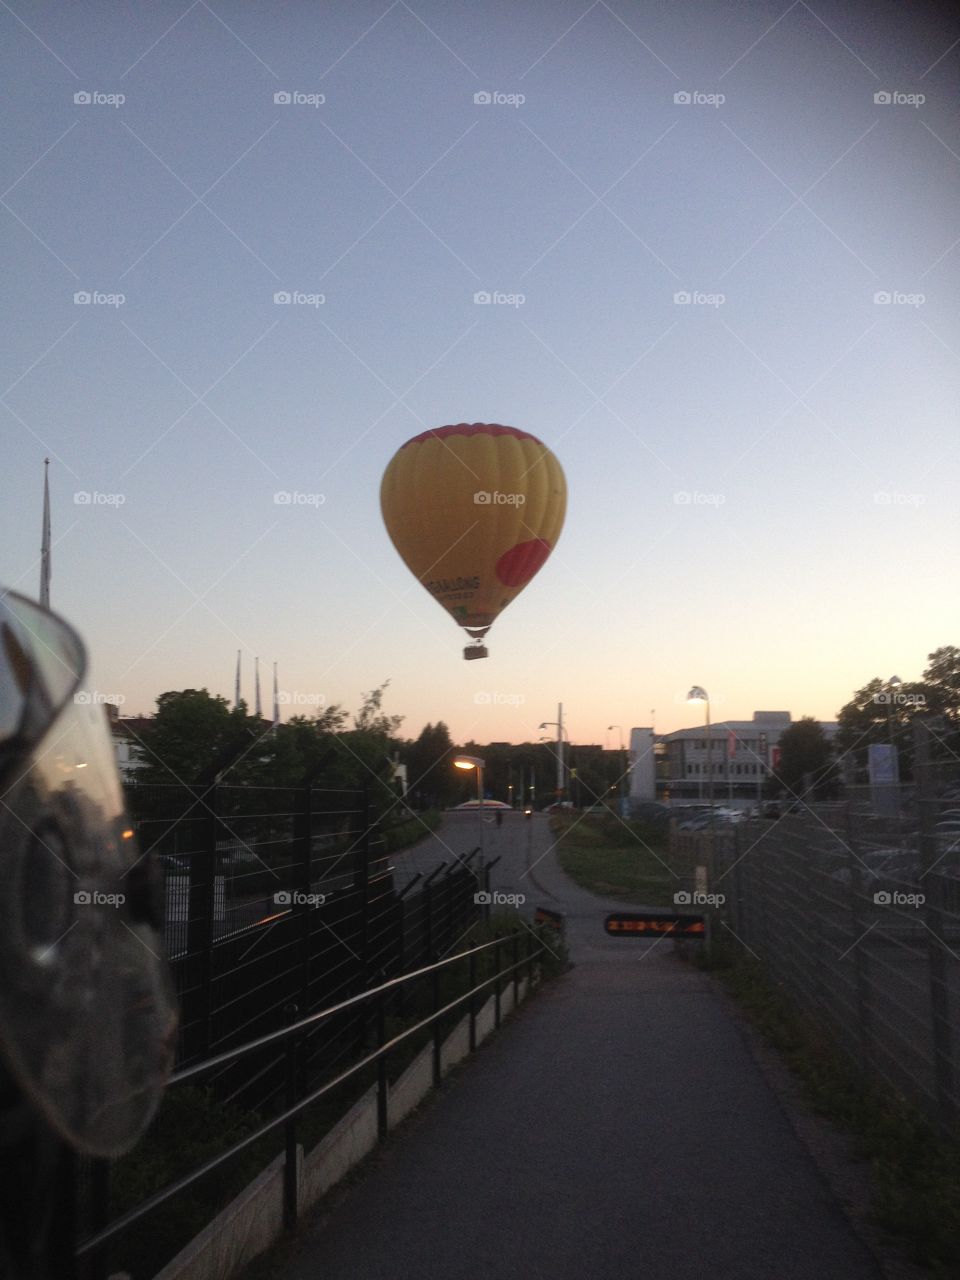 pic taken from a moped on a hot air ballon